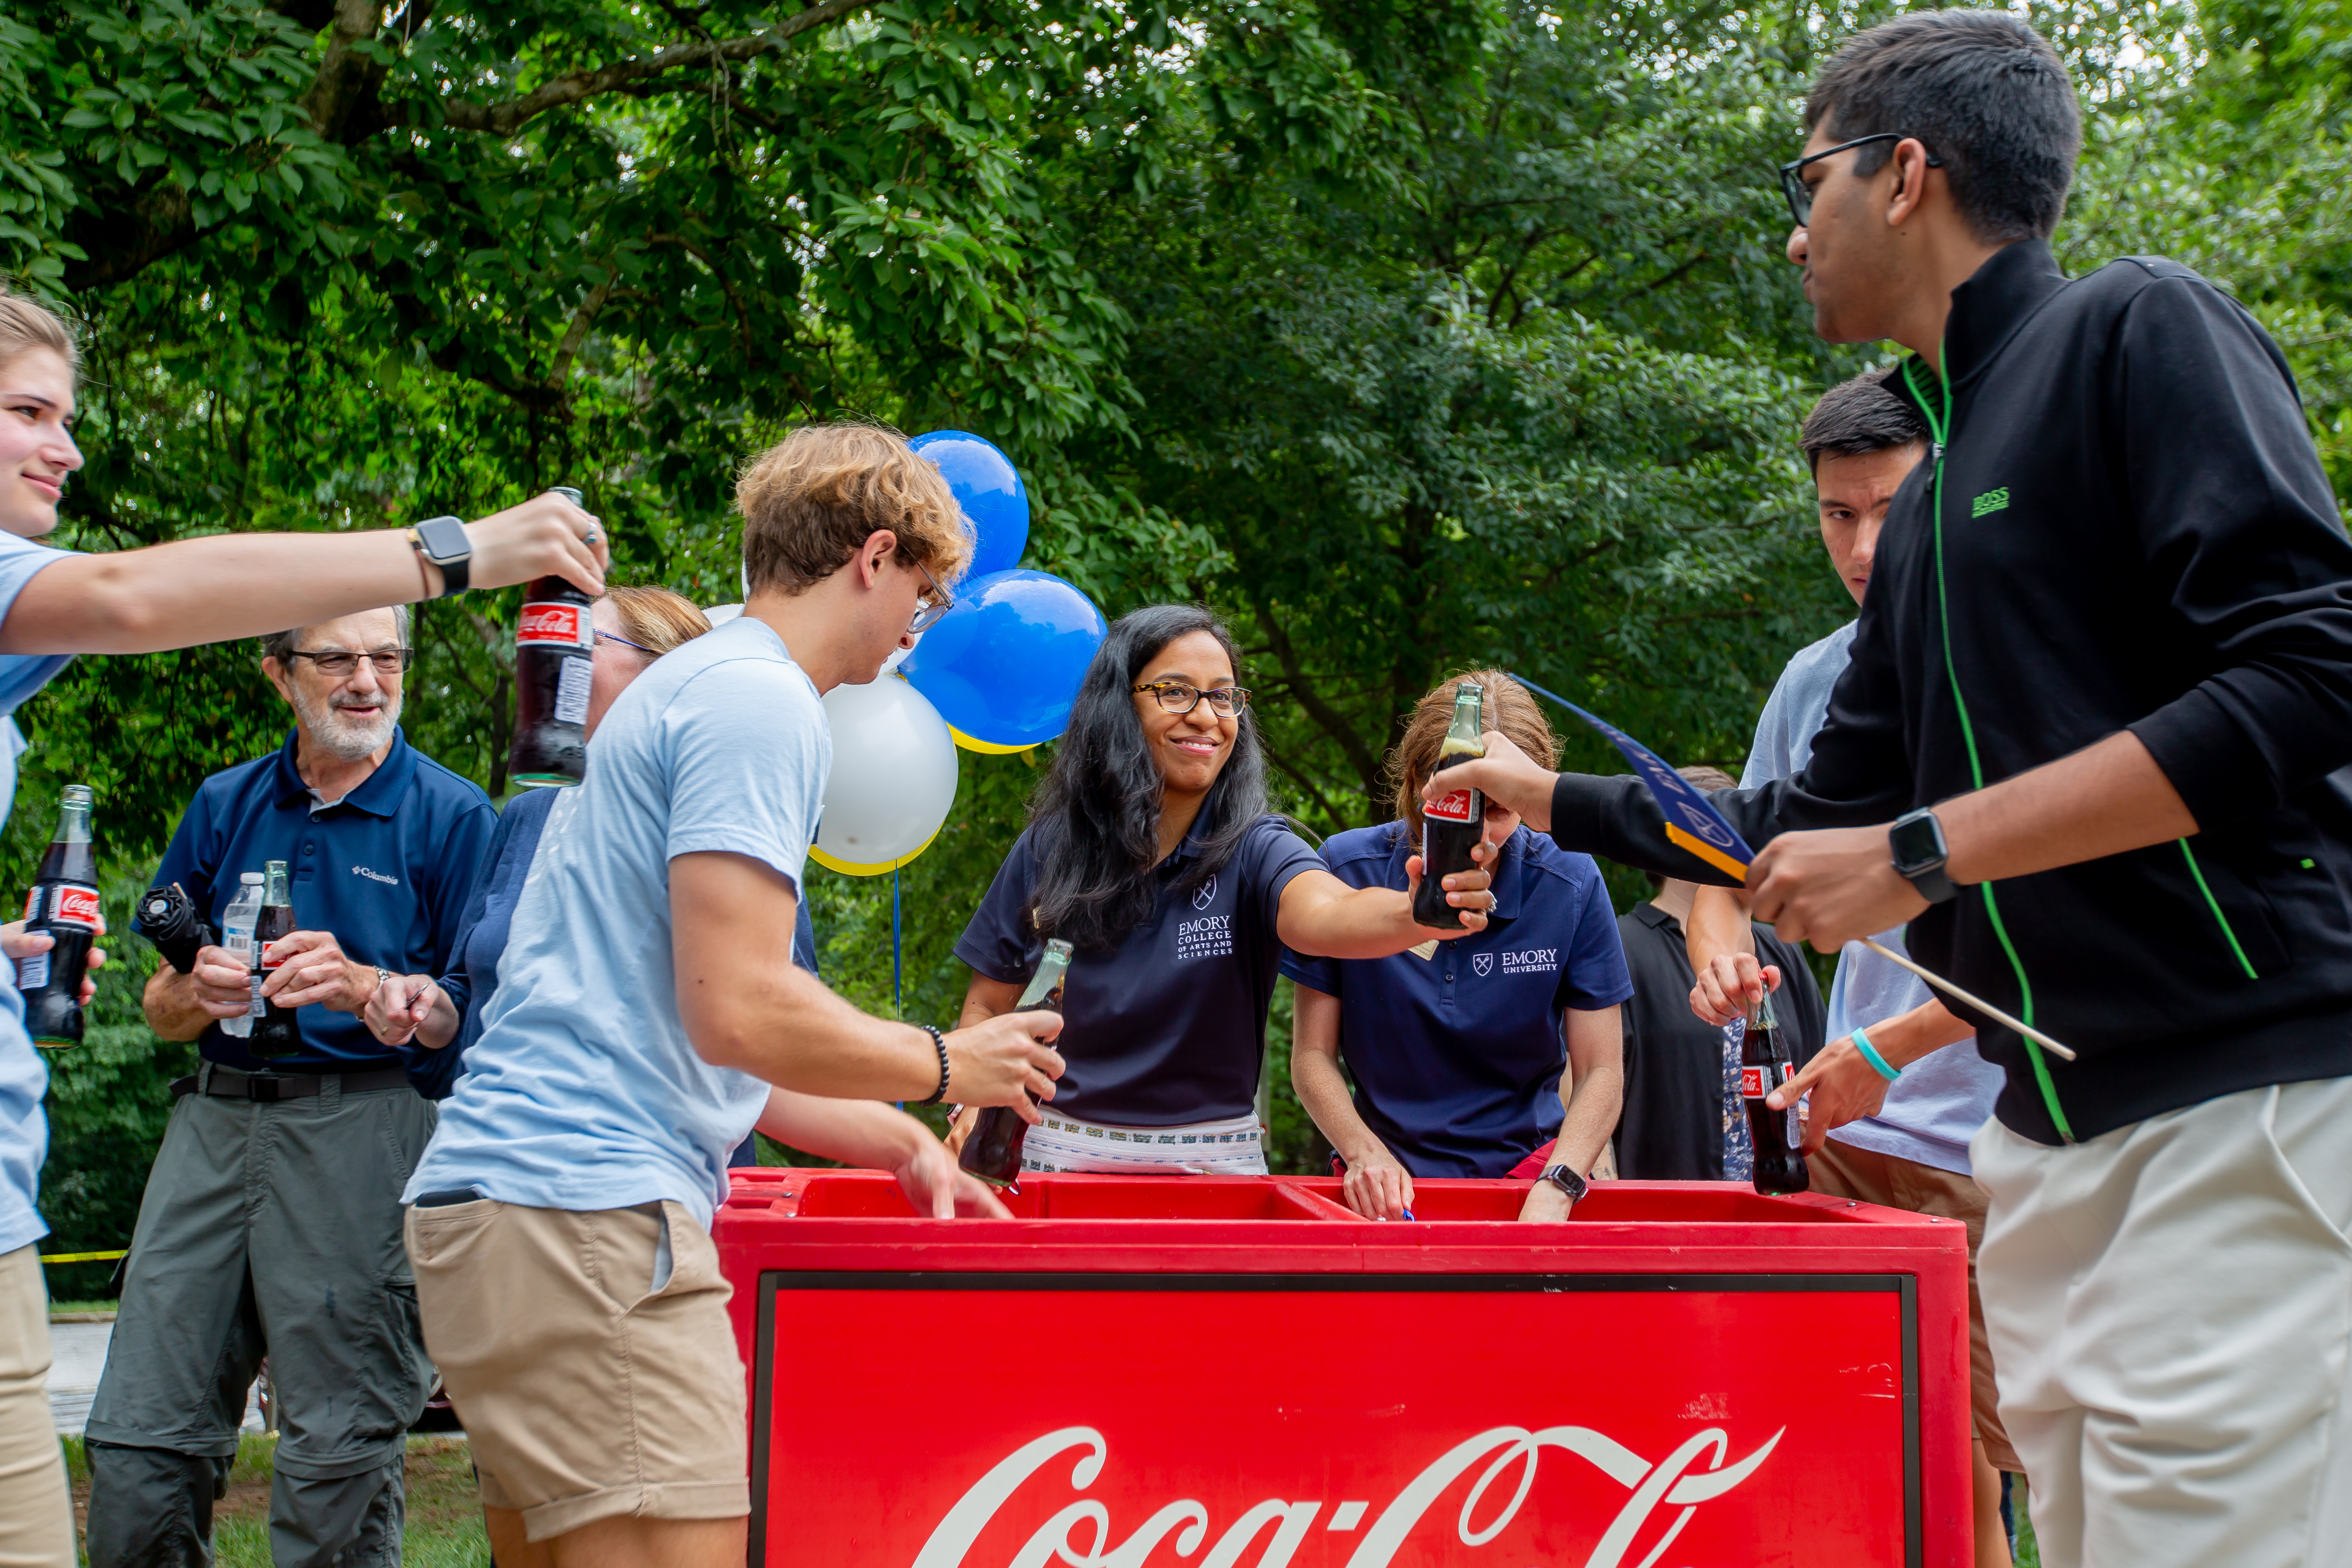 Staff handing out coca-cola 